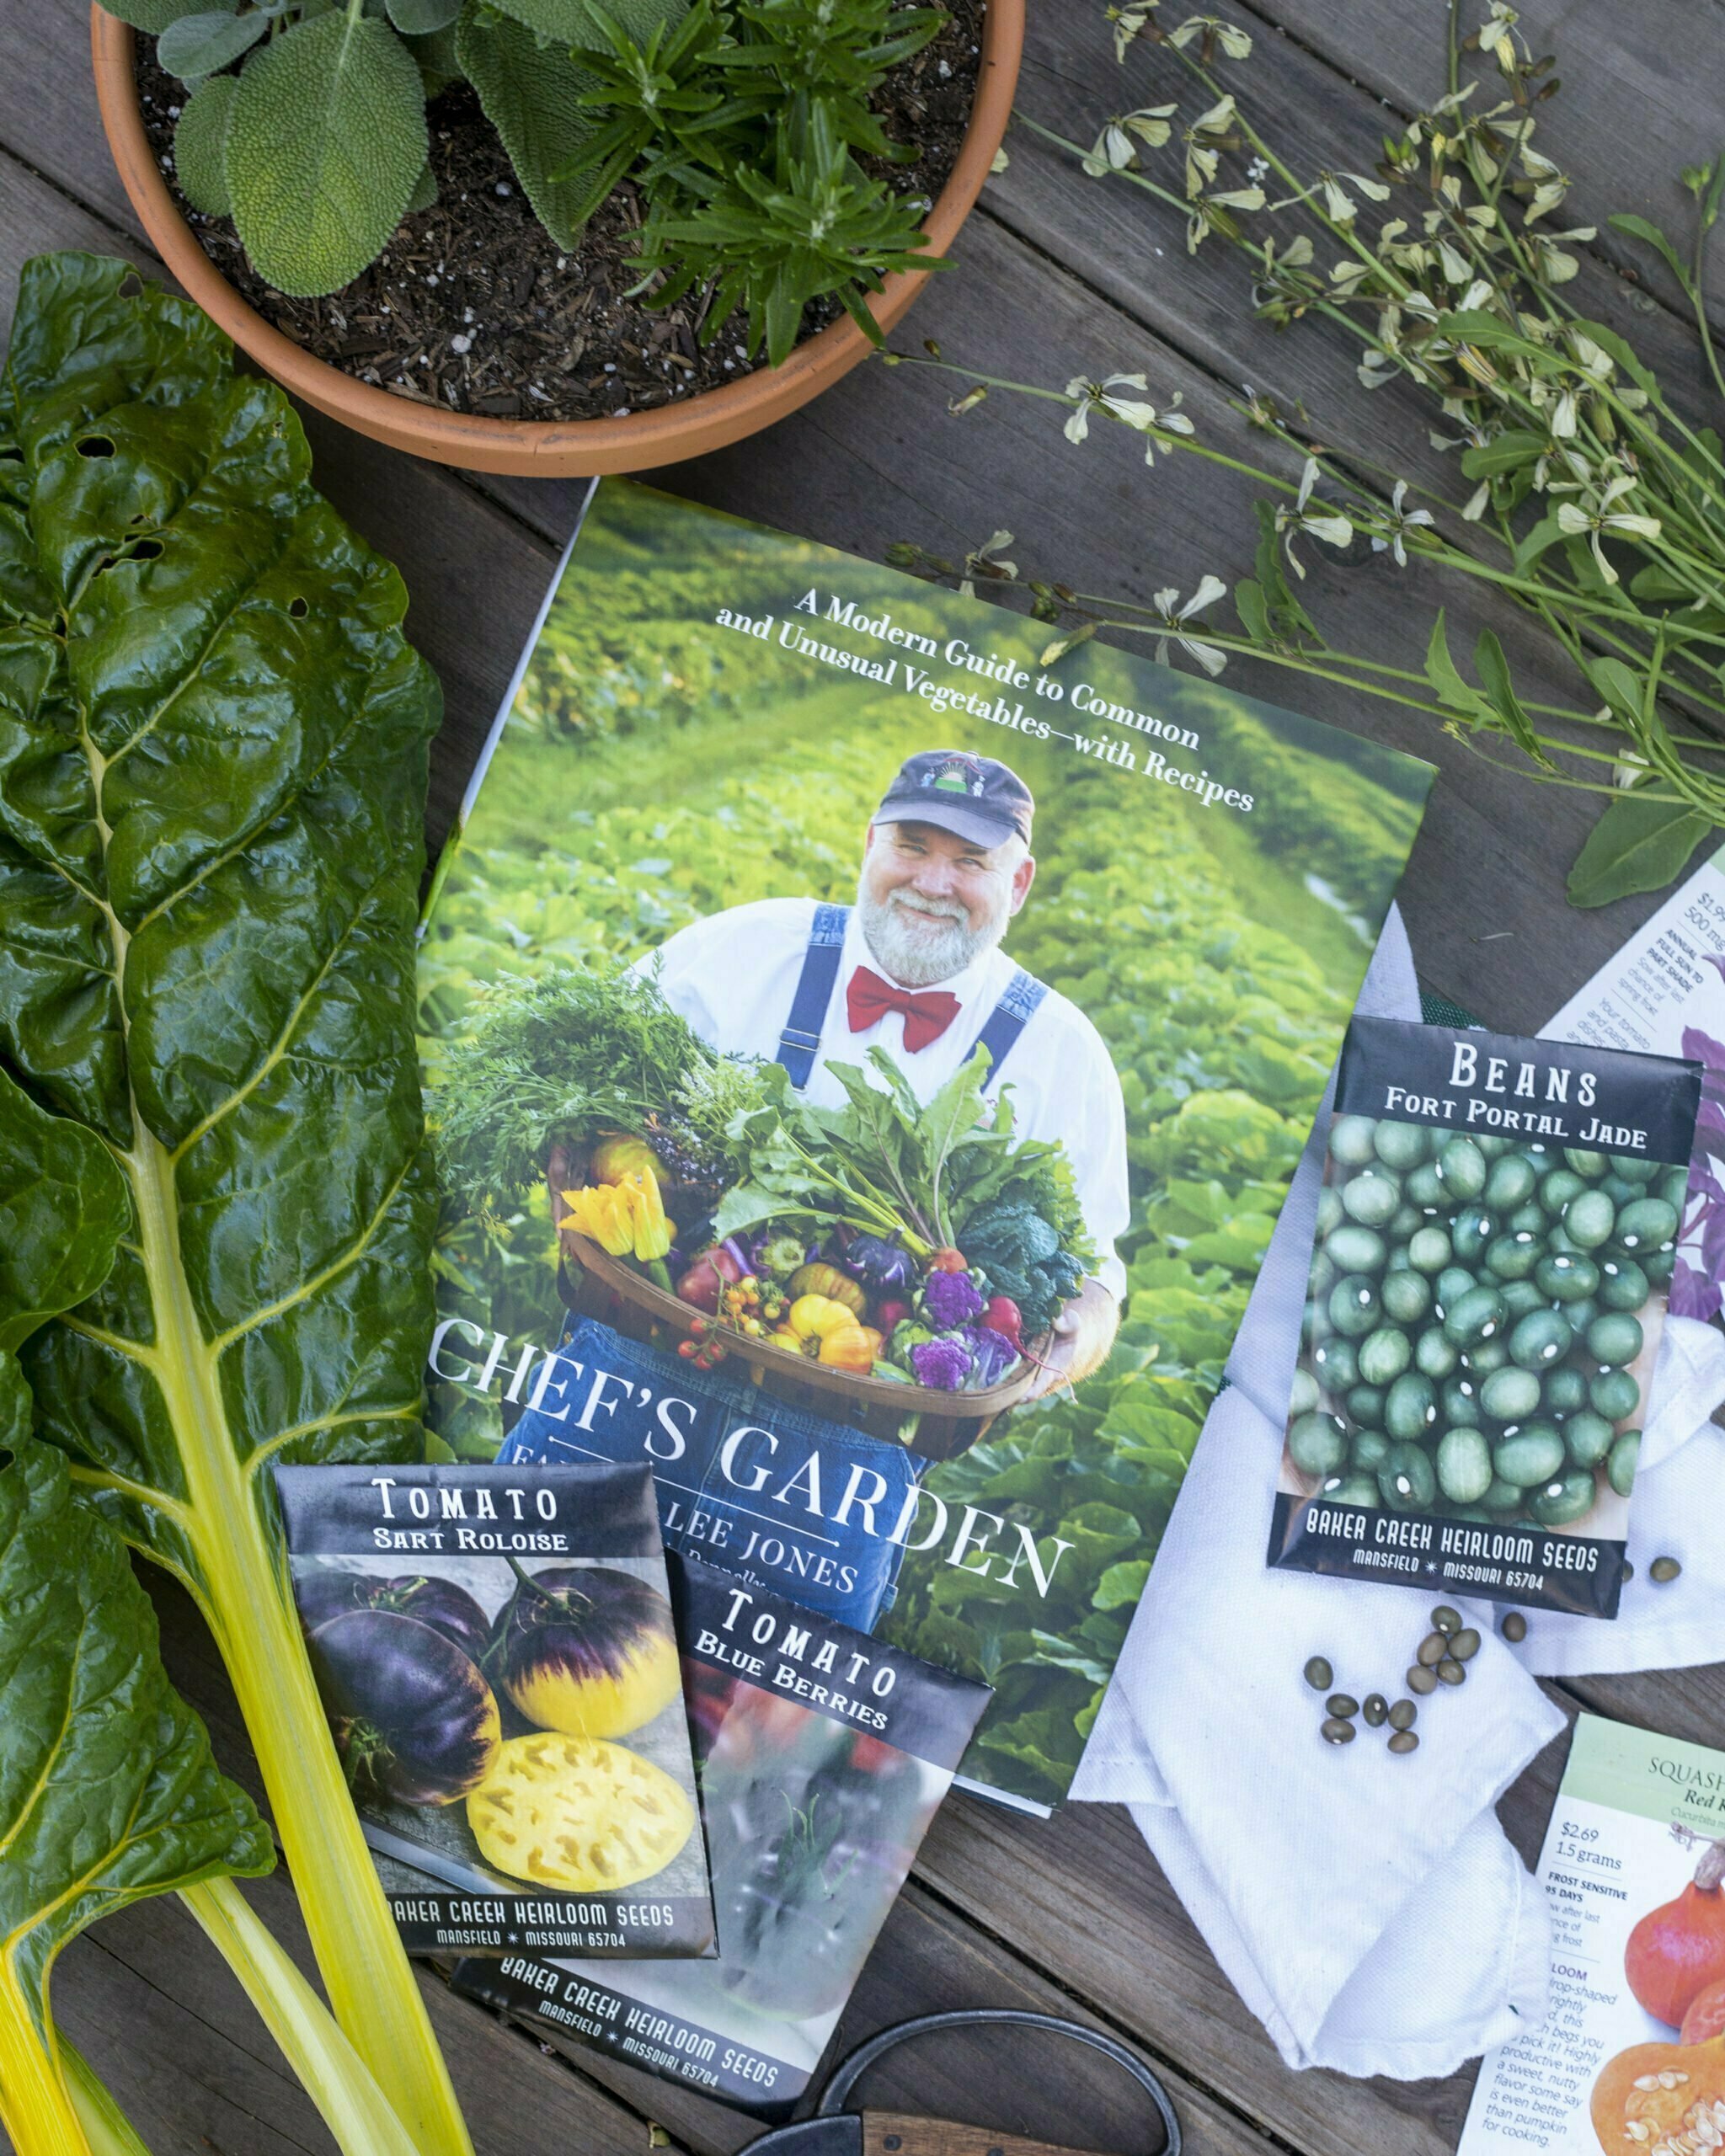 Five Garden Books for Chefs The Chef's Garden: A Modern Guide to Common and Unusual Vegetables With Recipes by Farmer Lee Jones